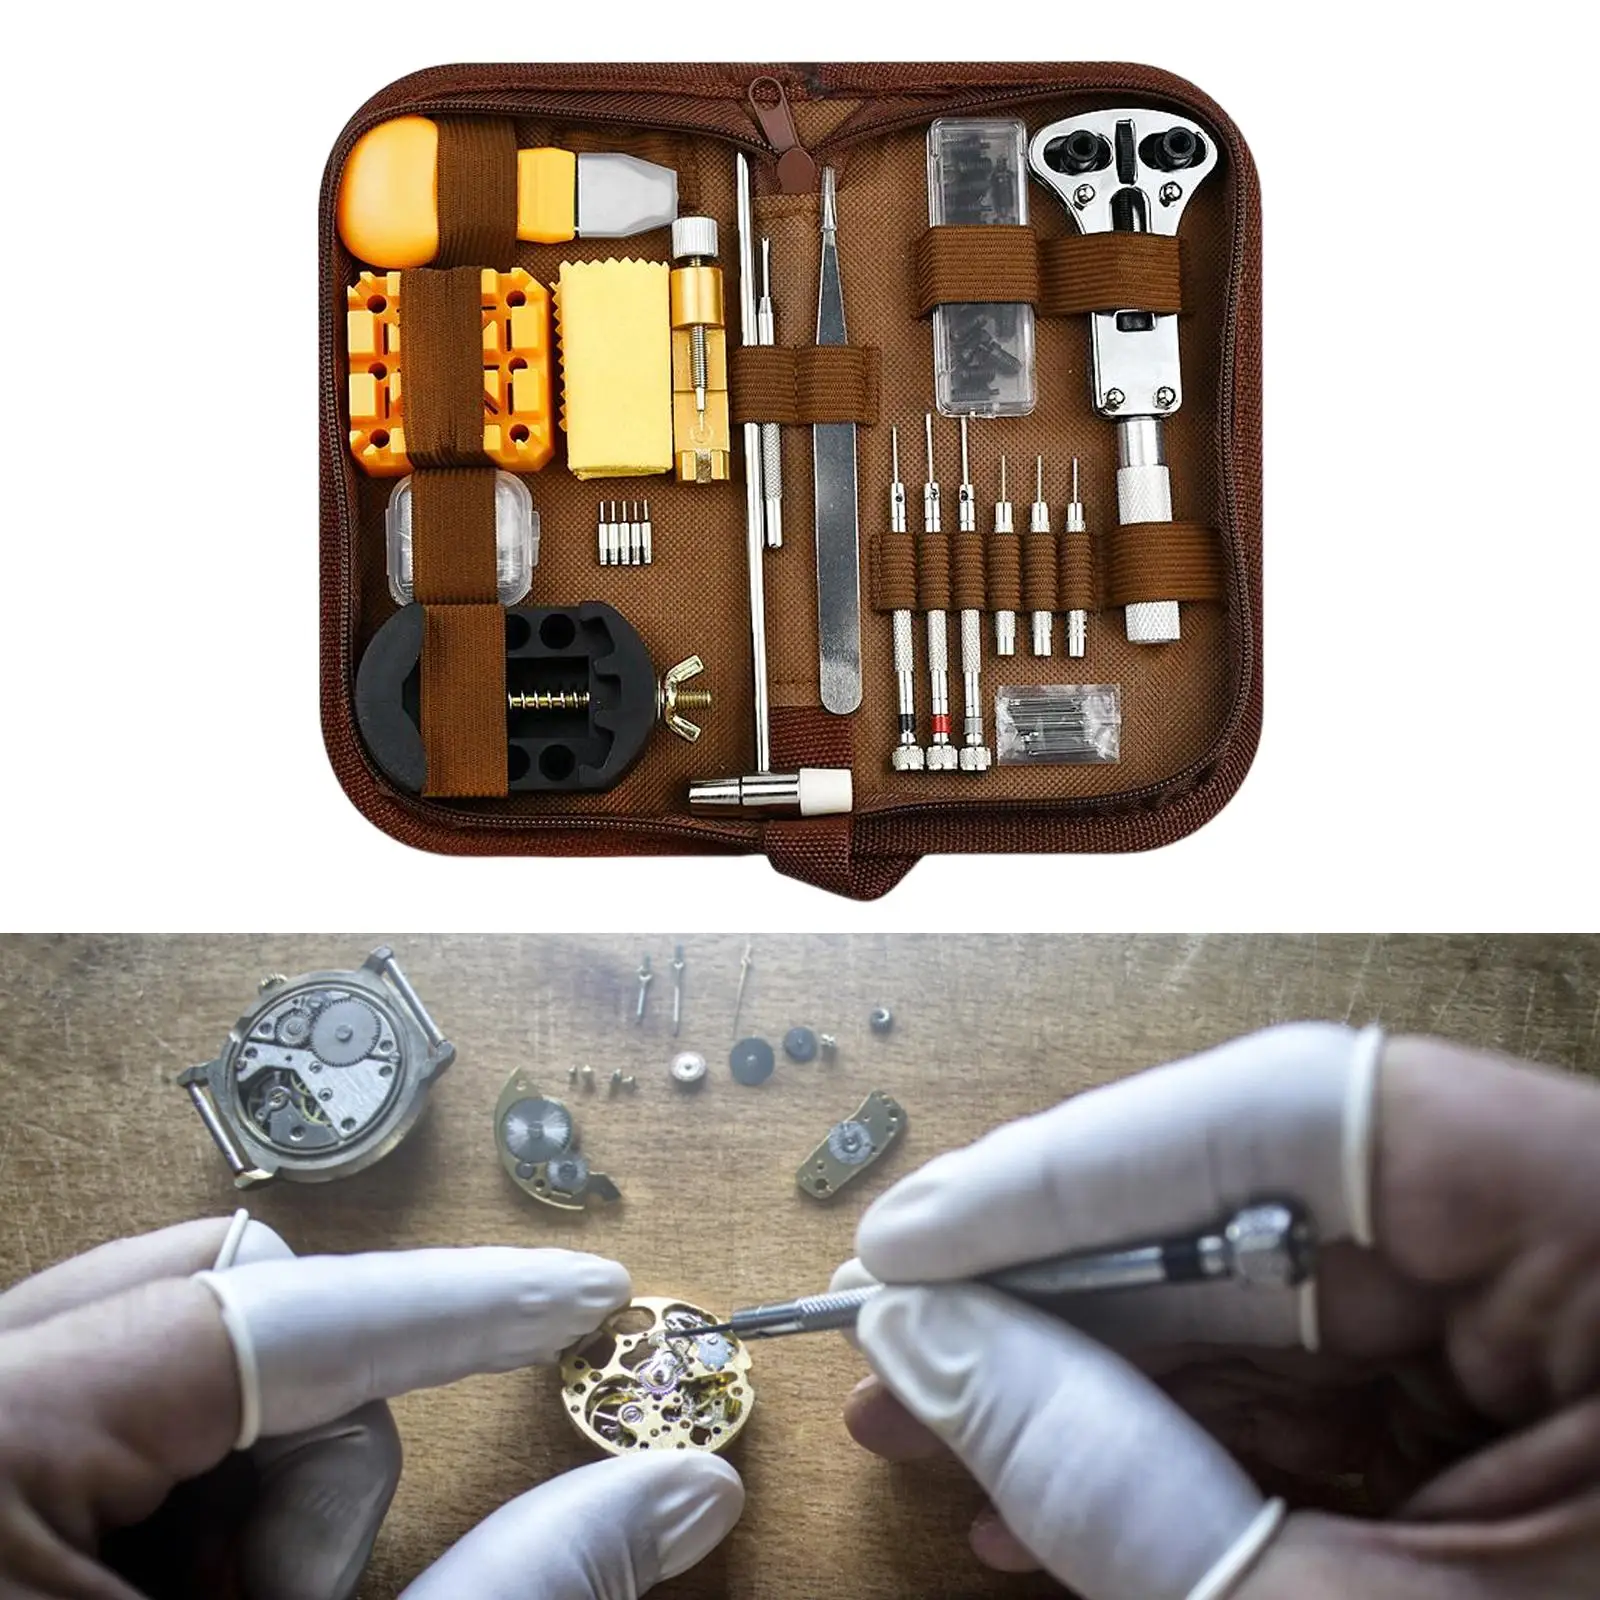 168 Pieces Watch Repair Tool Kit Multifunctional Portable Tweezers Spring Bar Carrying Case Adjust 5 Extra Pins Link Pin Removal